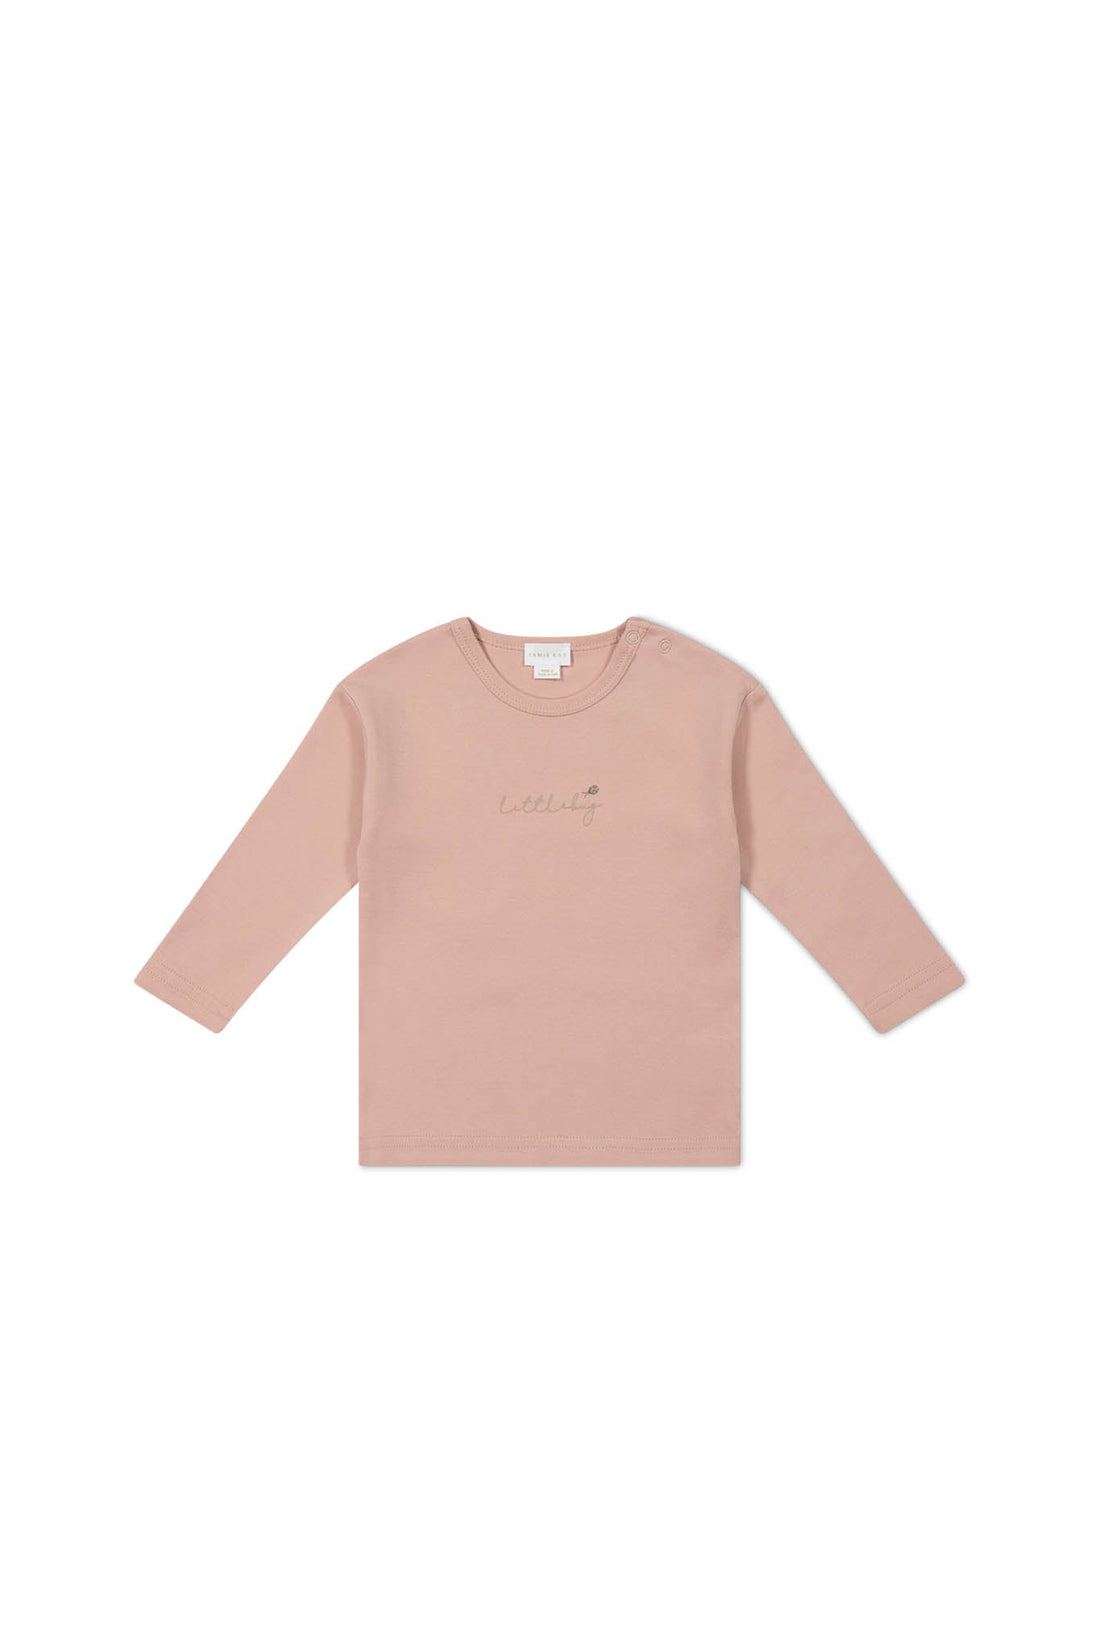 Pima Cotton Arnold Long Sleeve Top - Dusky Rose Little Bug Childrens Top from Jamie Kay USA